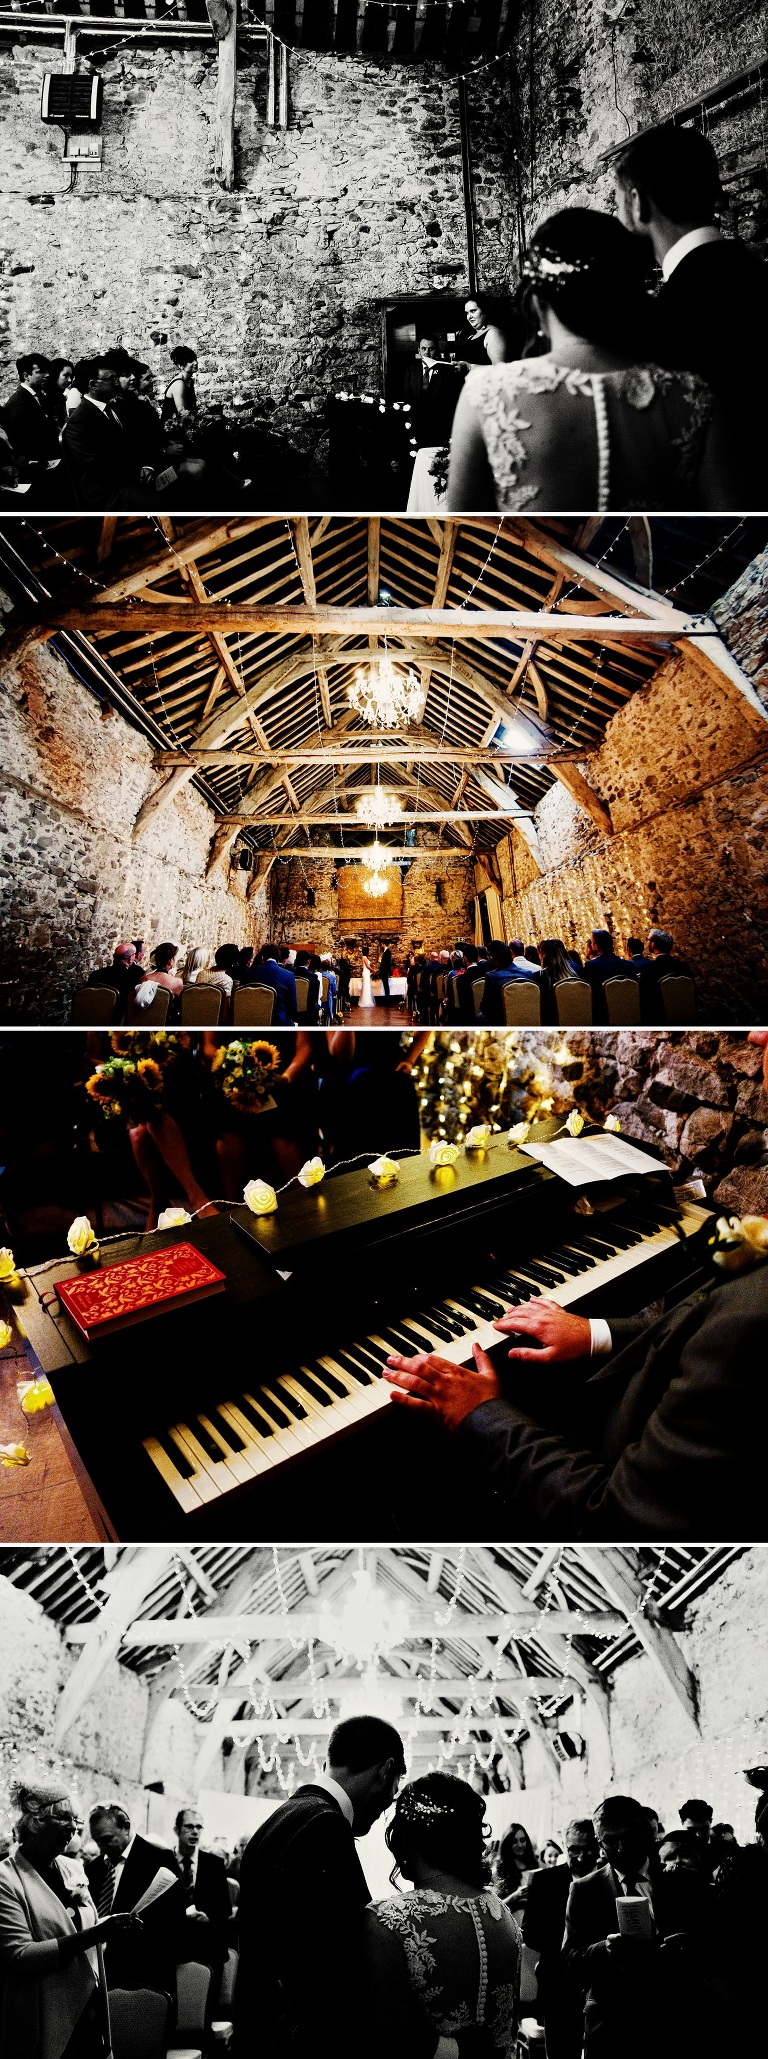 Wedding ceremony in the barn at park house in cumbria.